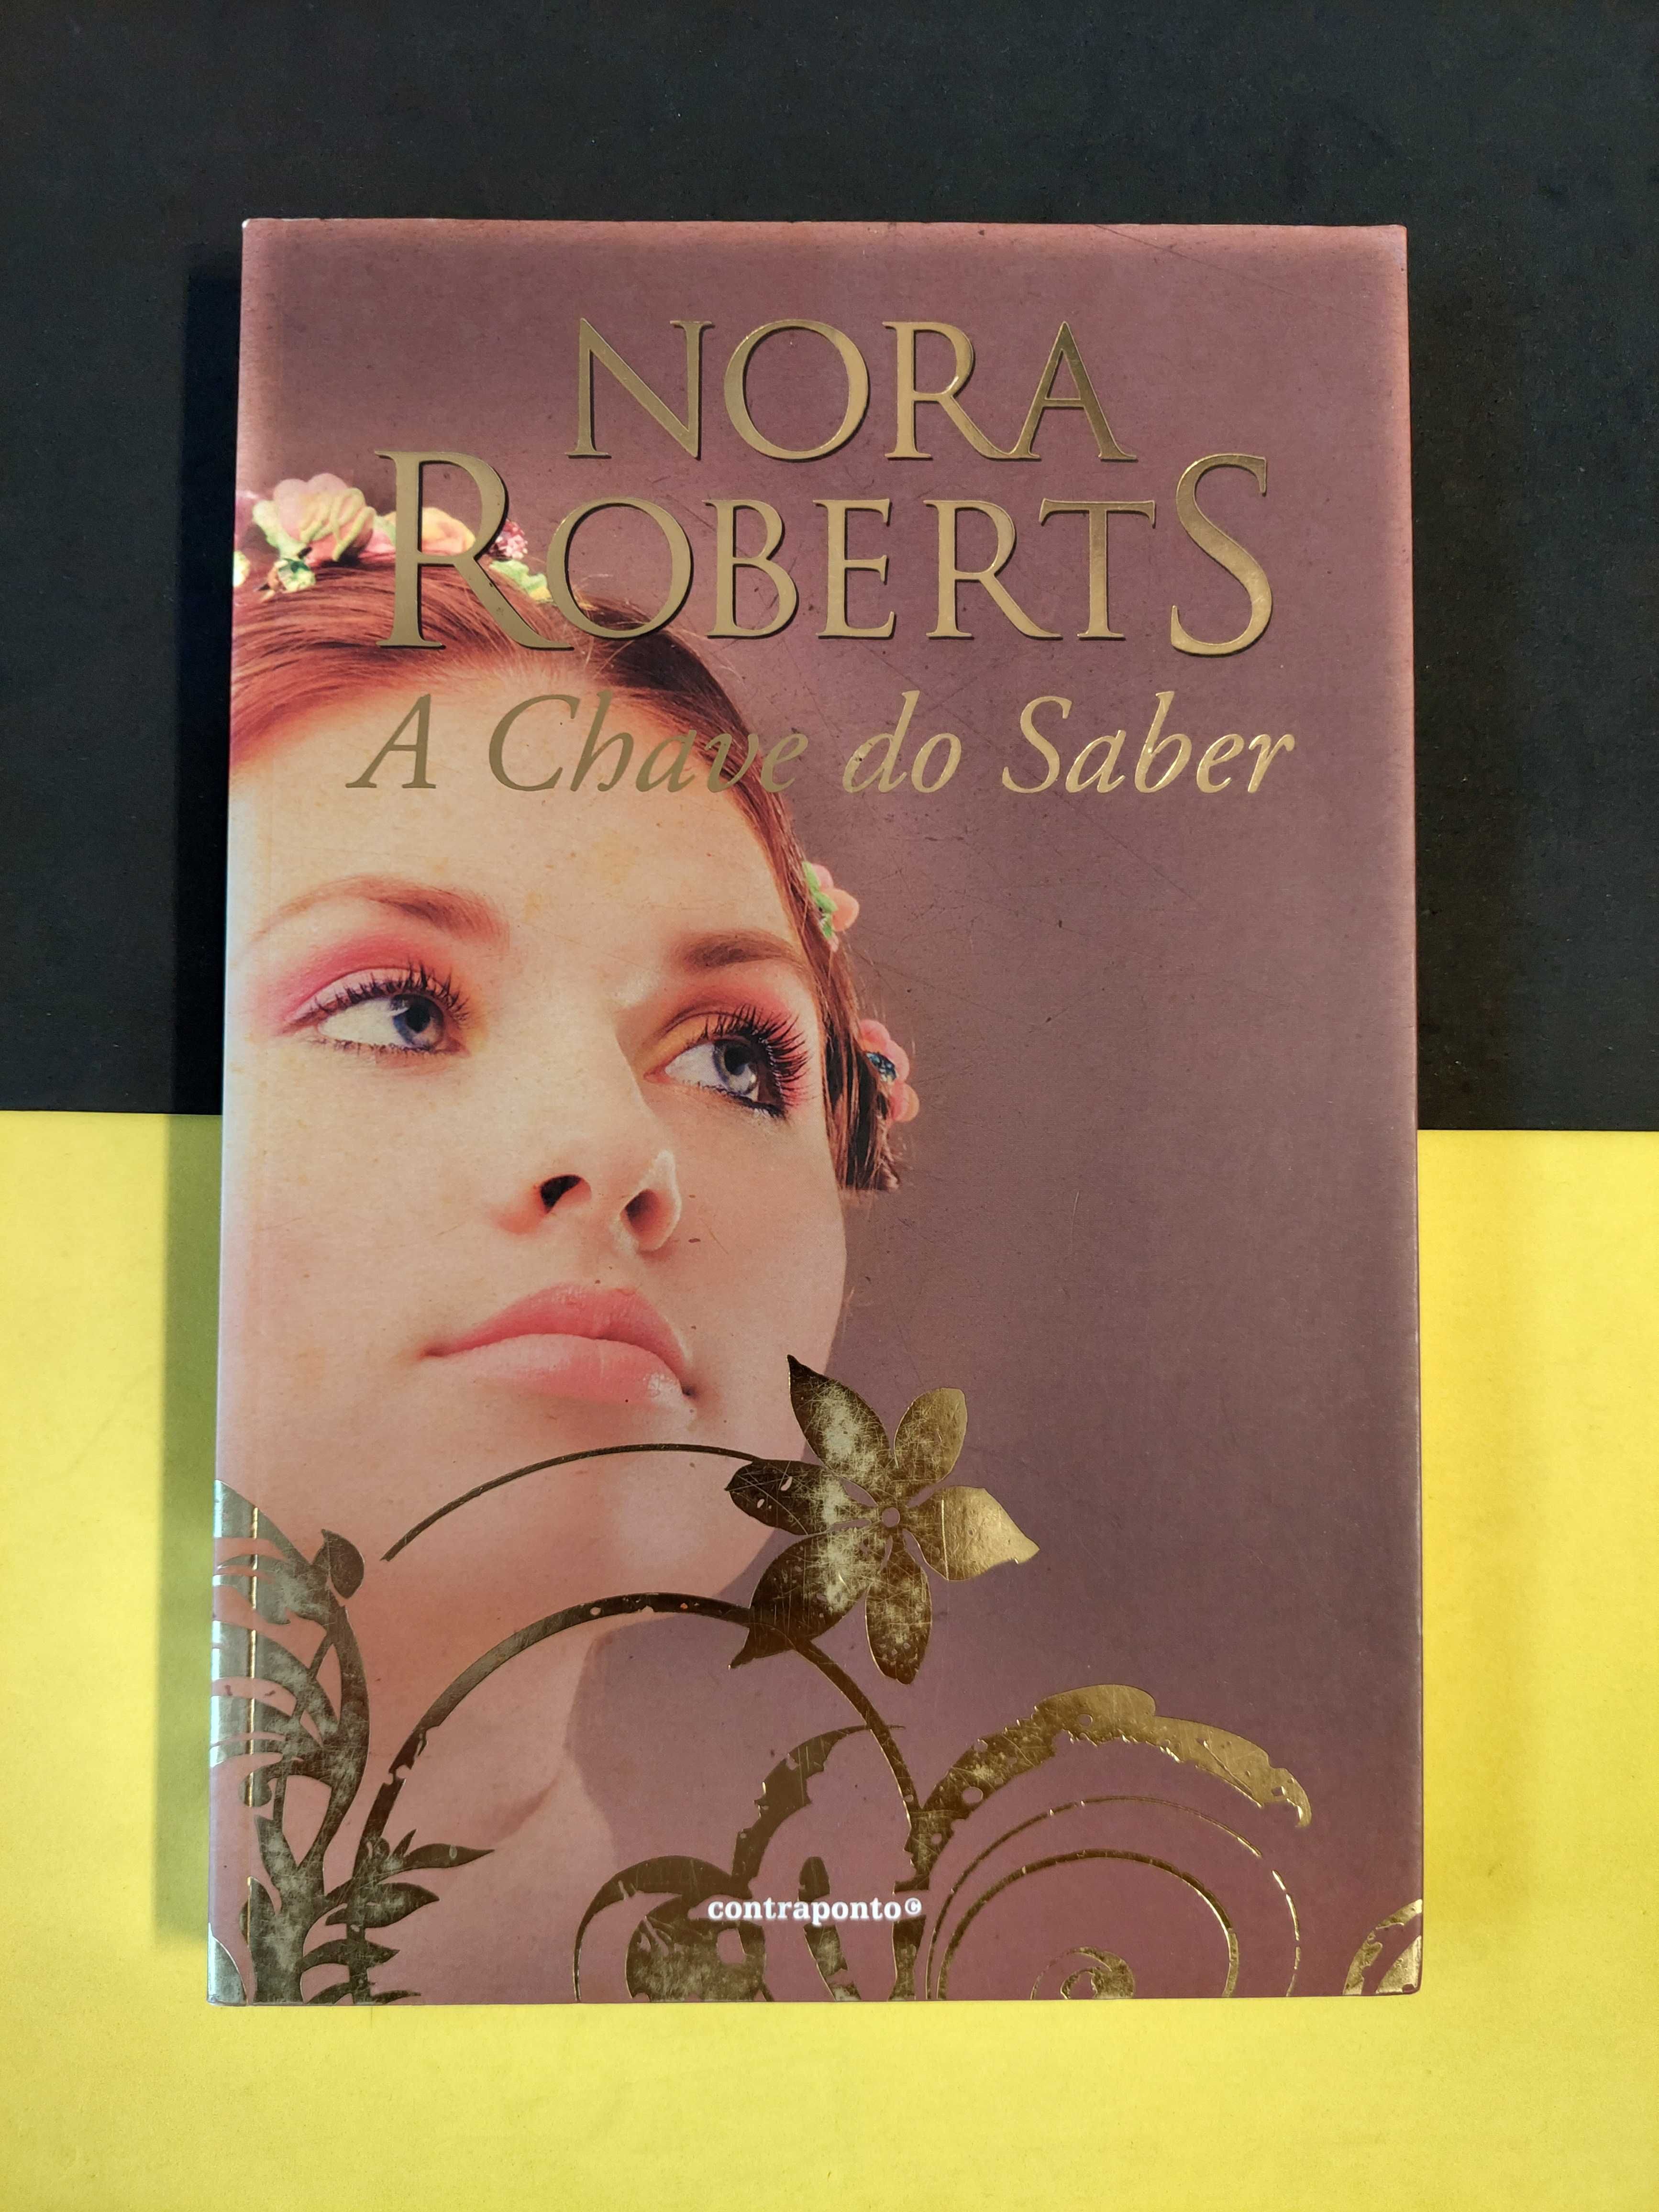 Nora Roberts - A chave do saber